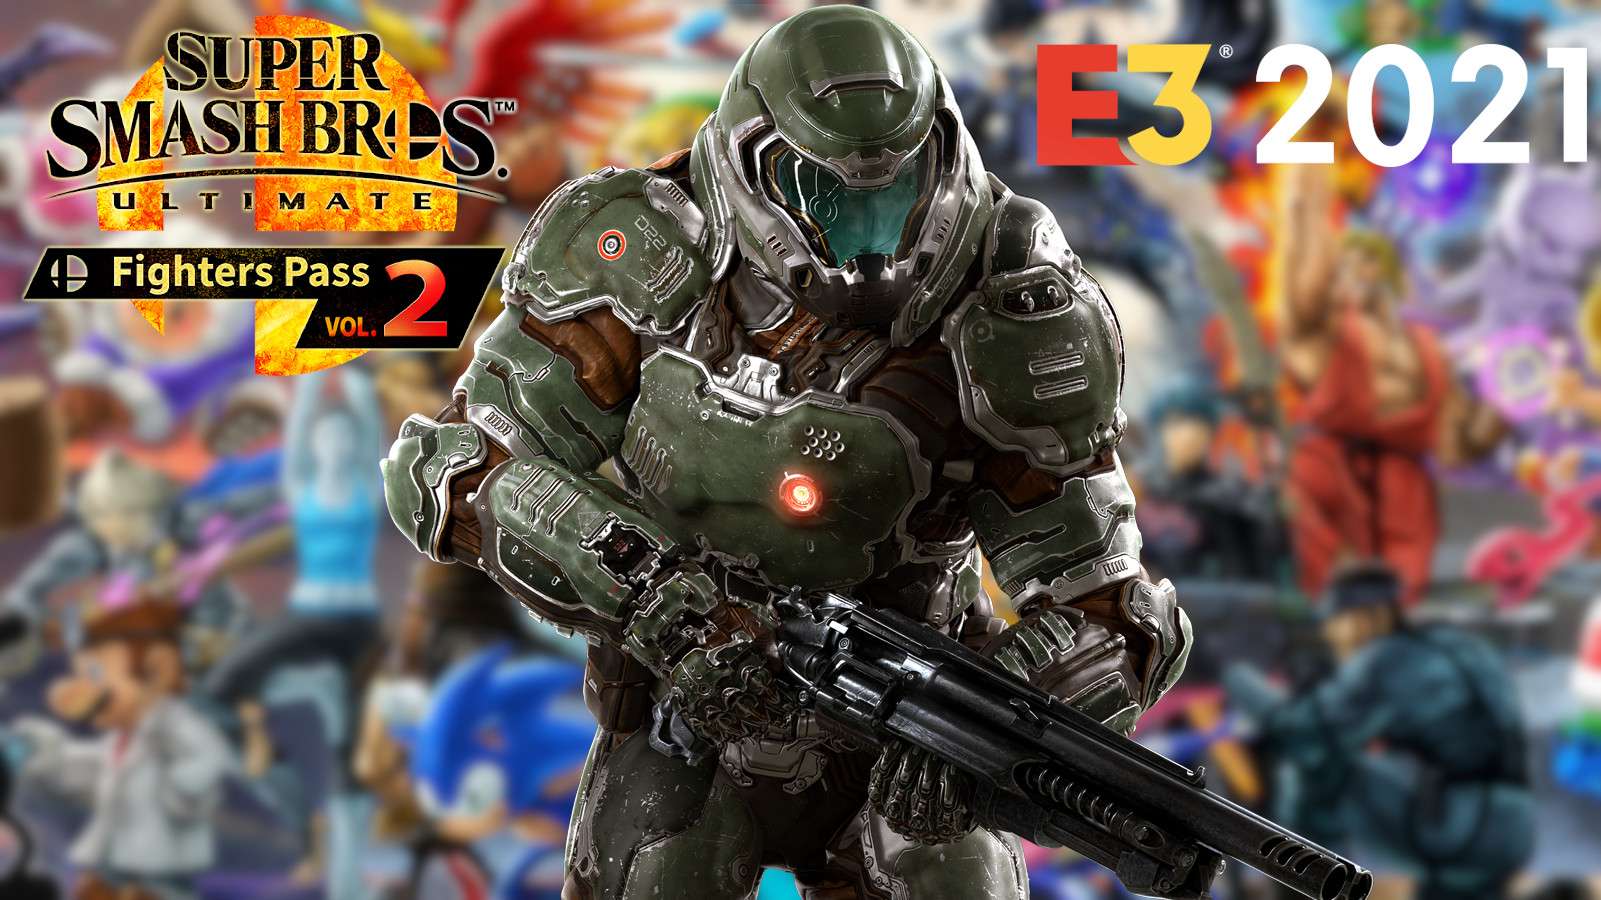 Doomslayer in Smash Ultimate reveal at E3 2021